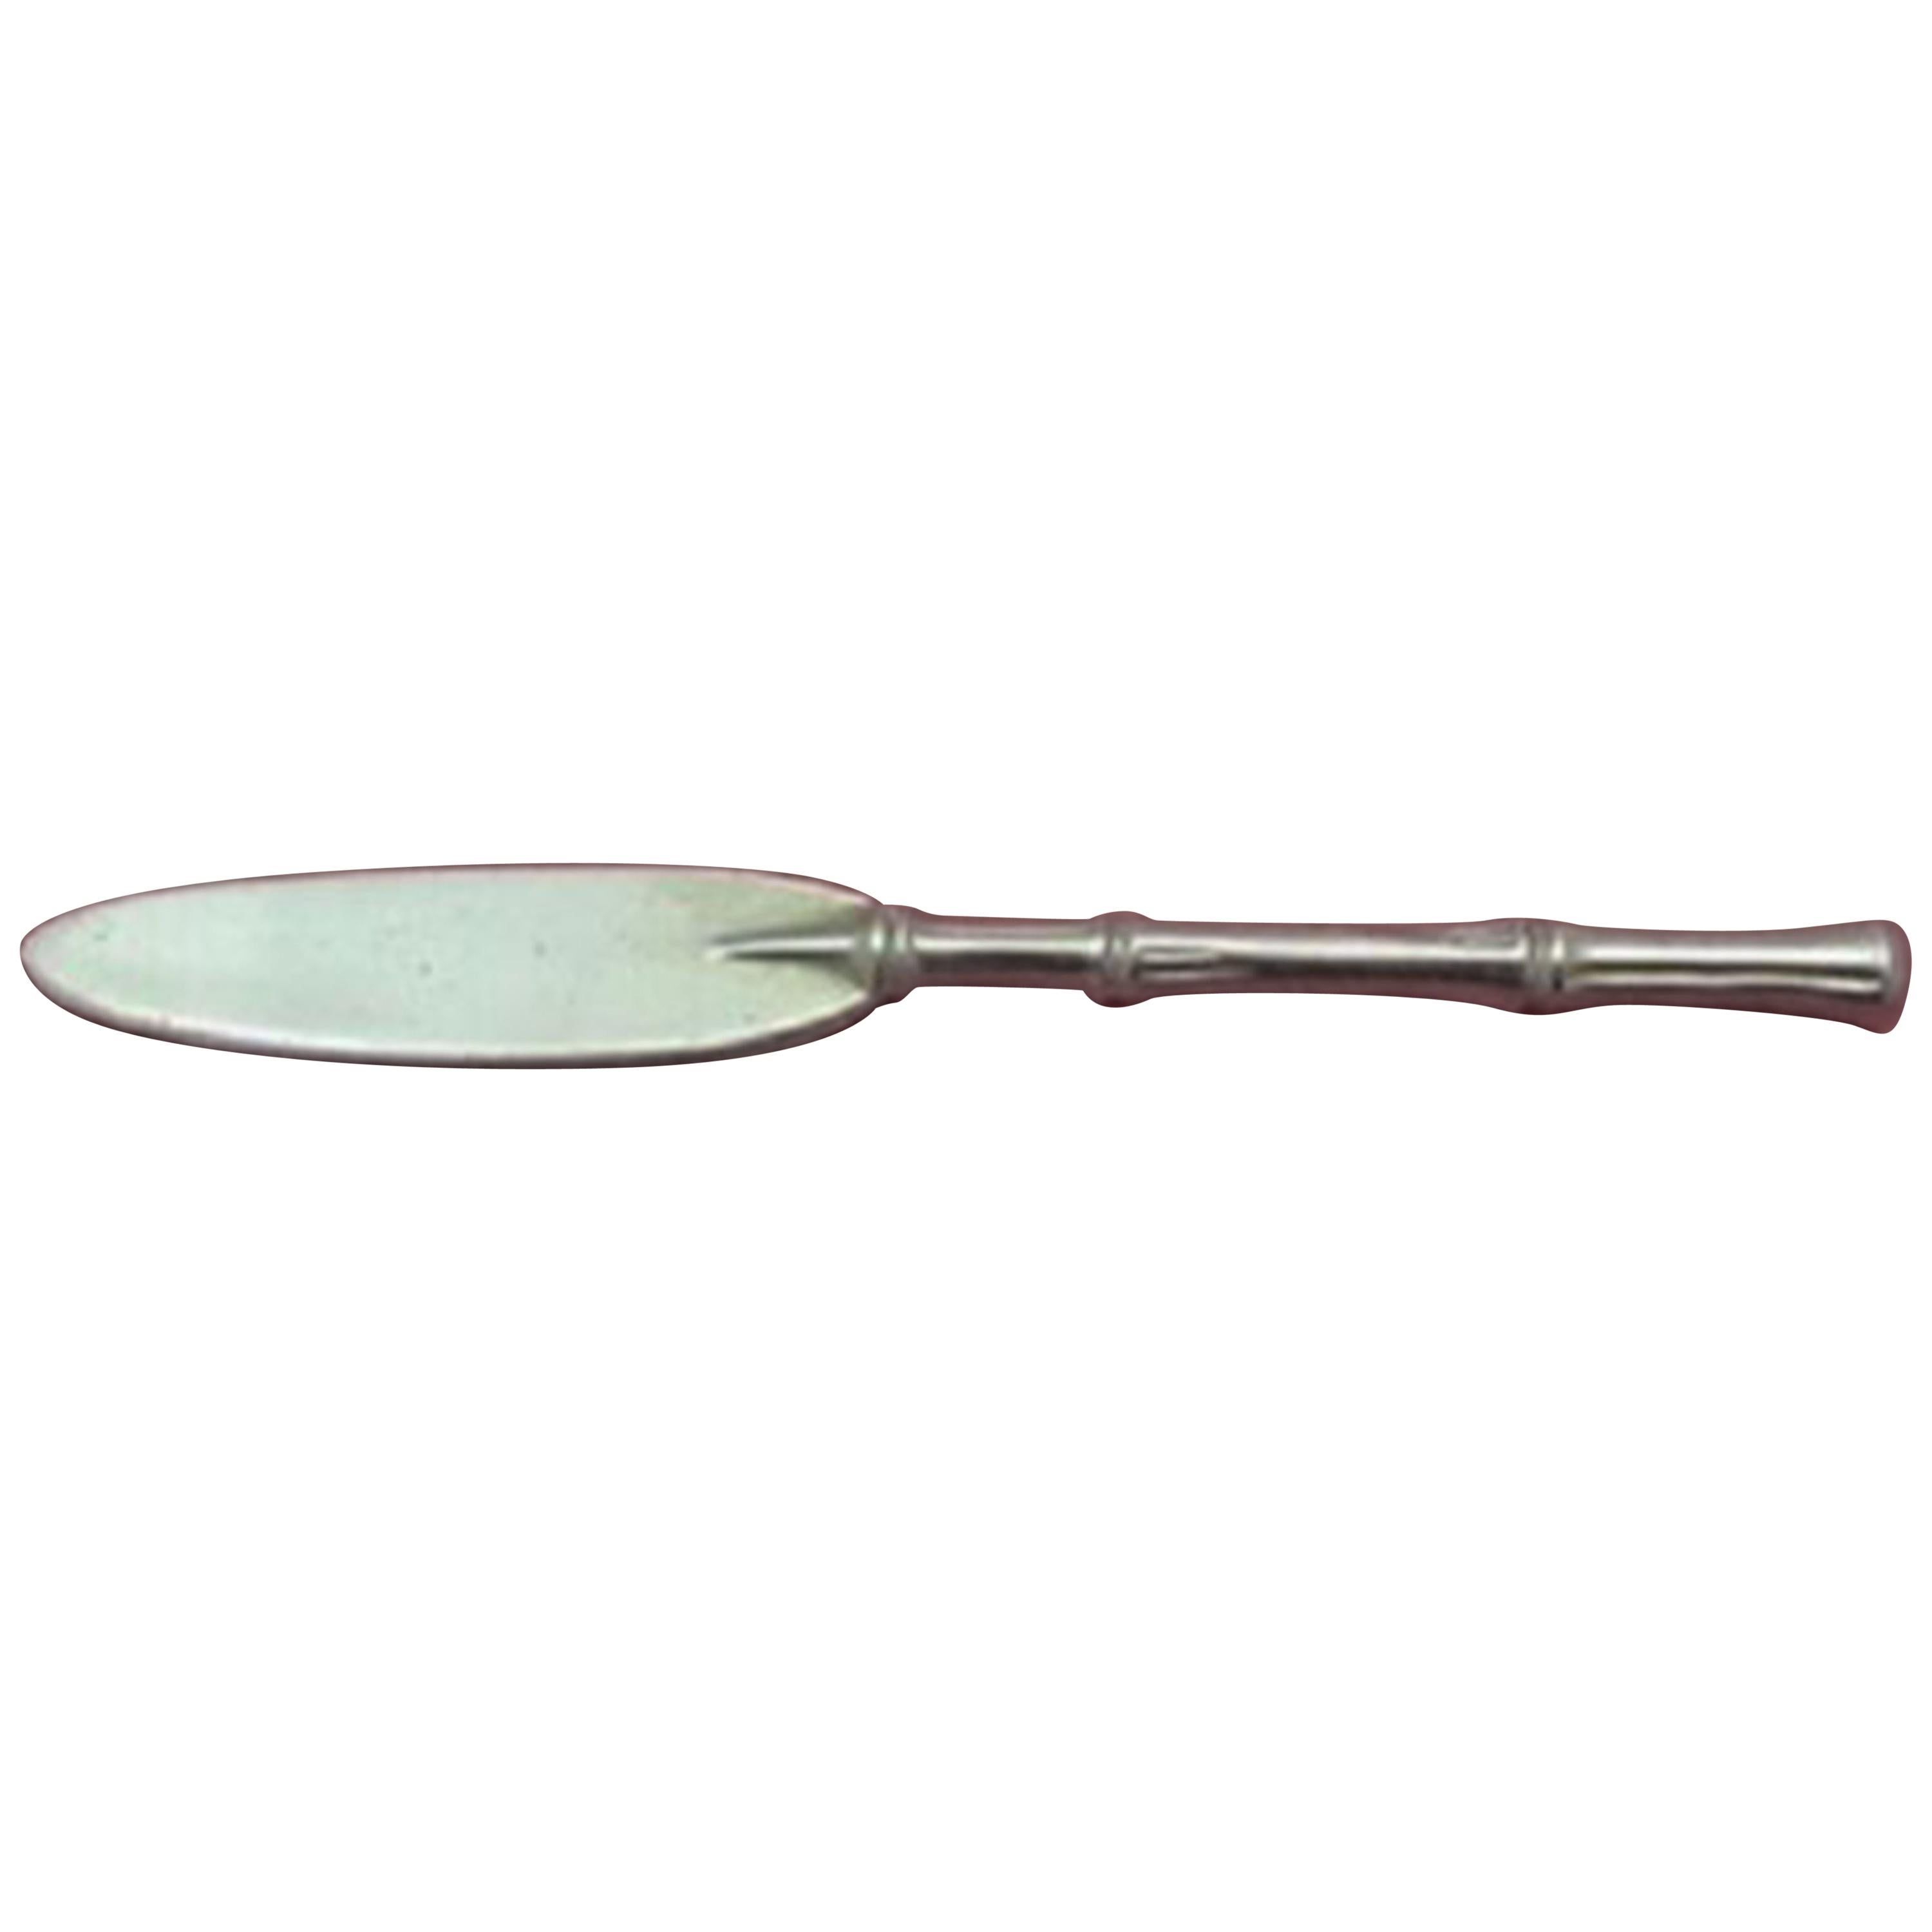 Bamboo by Tiffany & Co Sterling Silver Butter Spreader Flat Handle